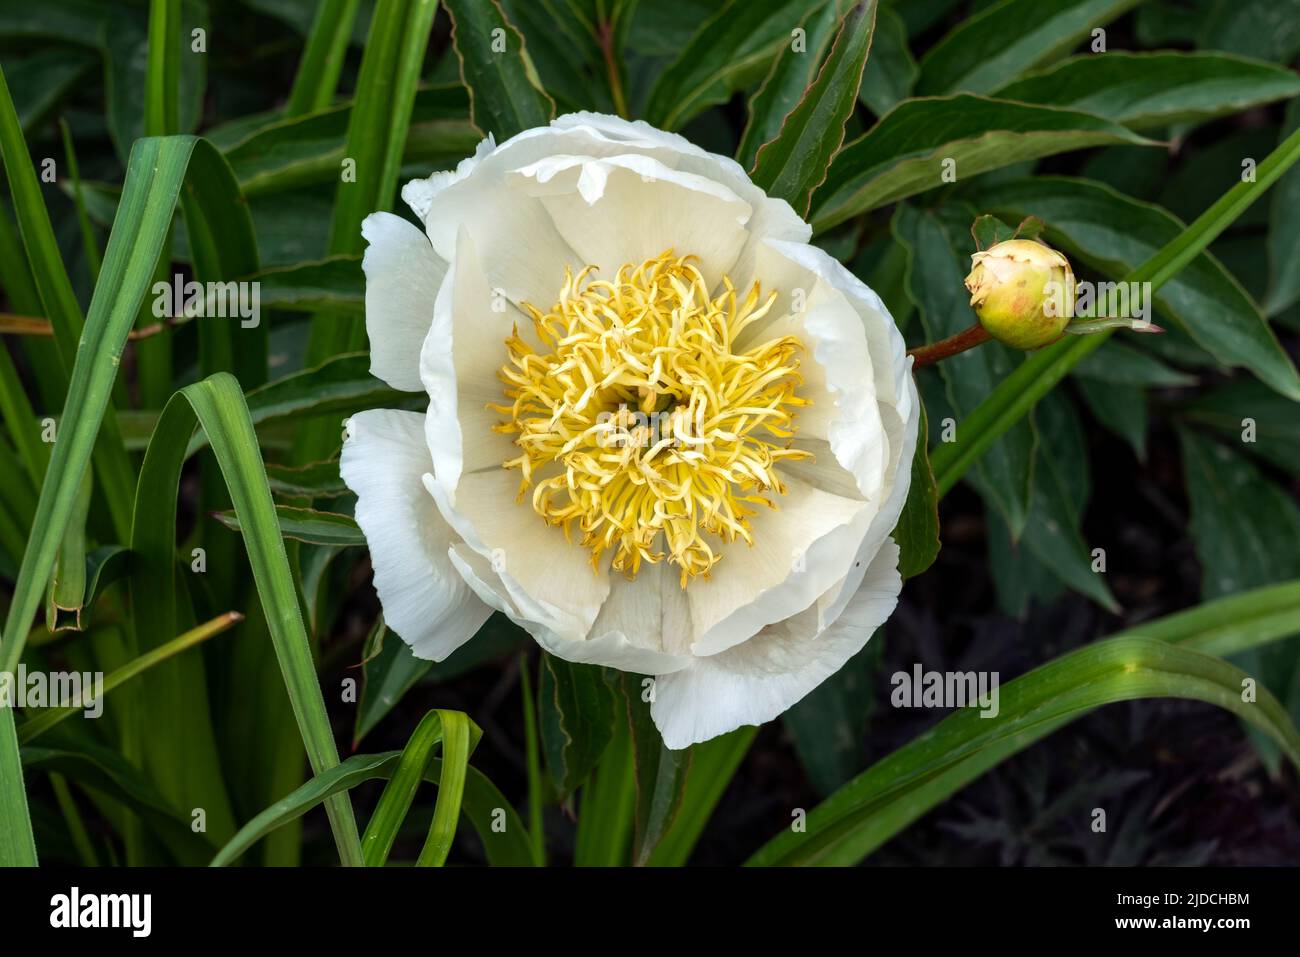 Peony 'Lotus Queen' (paeonia) a spring summer flowering plant with a white springtime flower, stock photo image Stock Photo